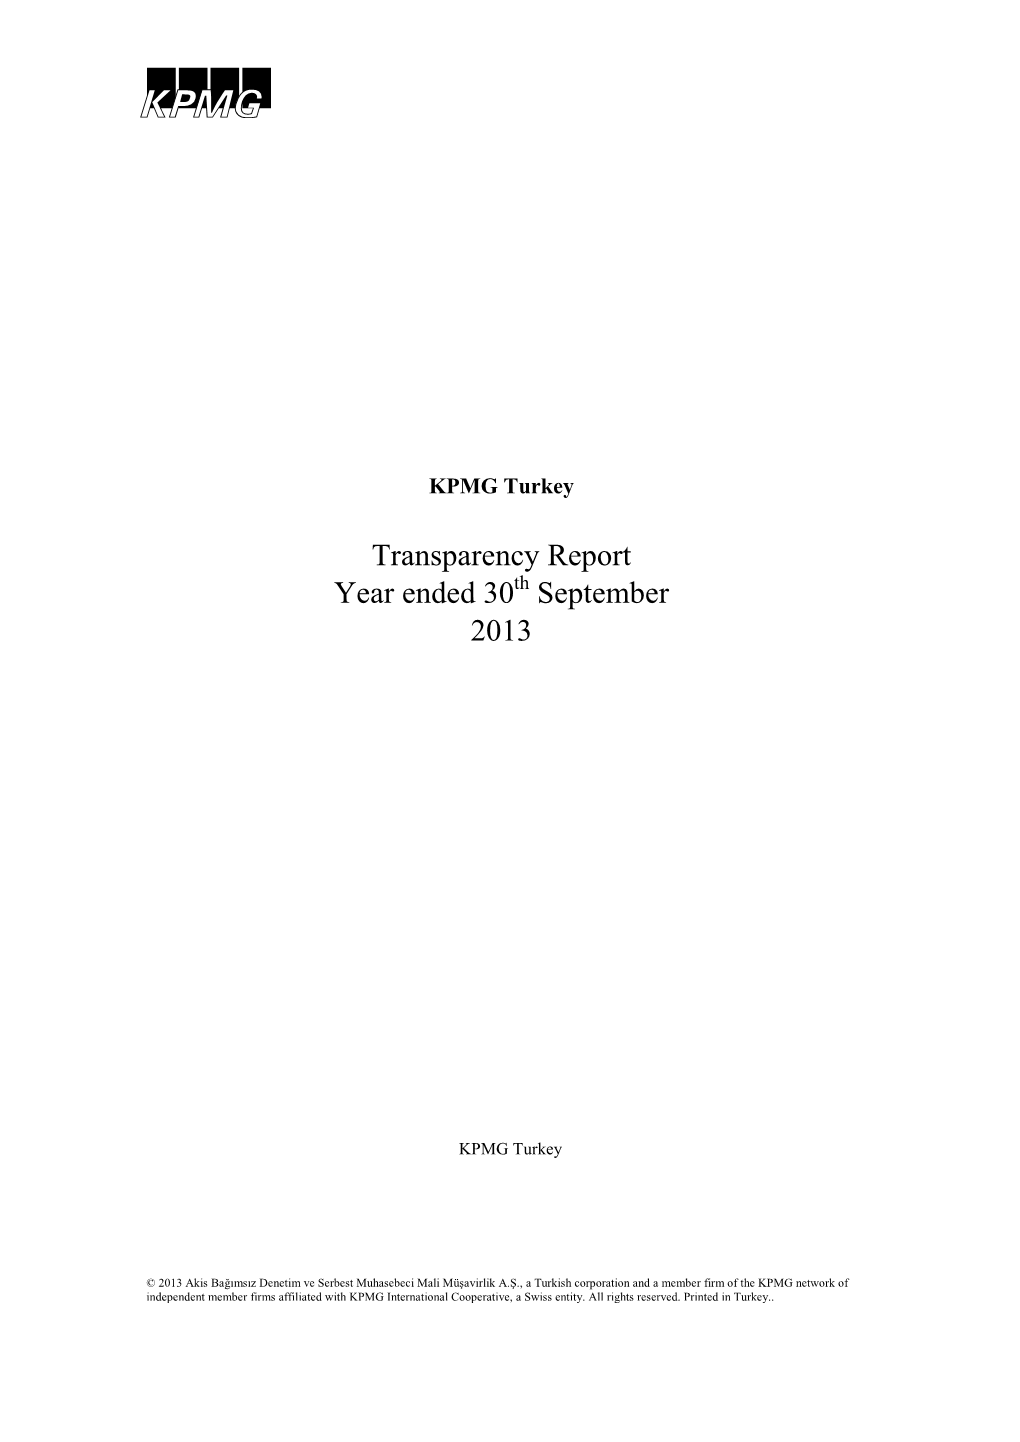 Transparency Report 2013